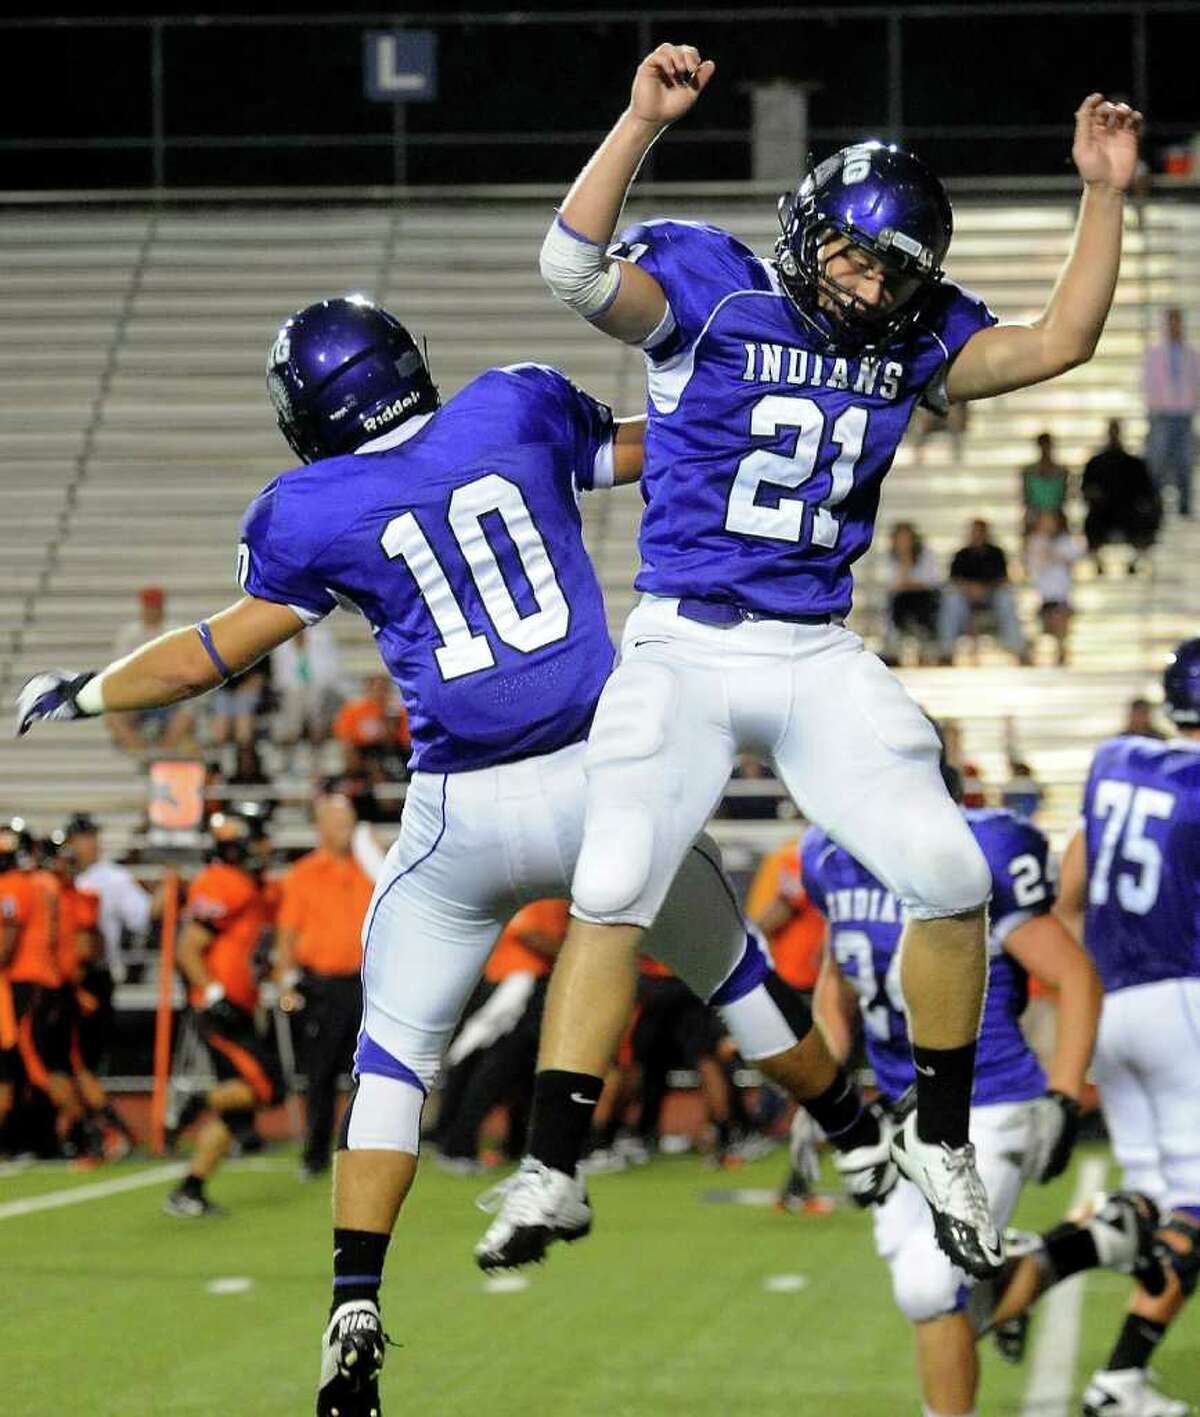 PNG's Tyler LaCour and Justin Sperl celebrate a touchdown made by Sperl during the game against Texas City at PNG High School in Port Neches, Friday, September 9, 2011. Tammy McKinley/The Enterprise